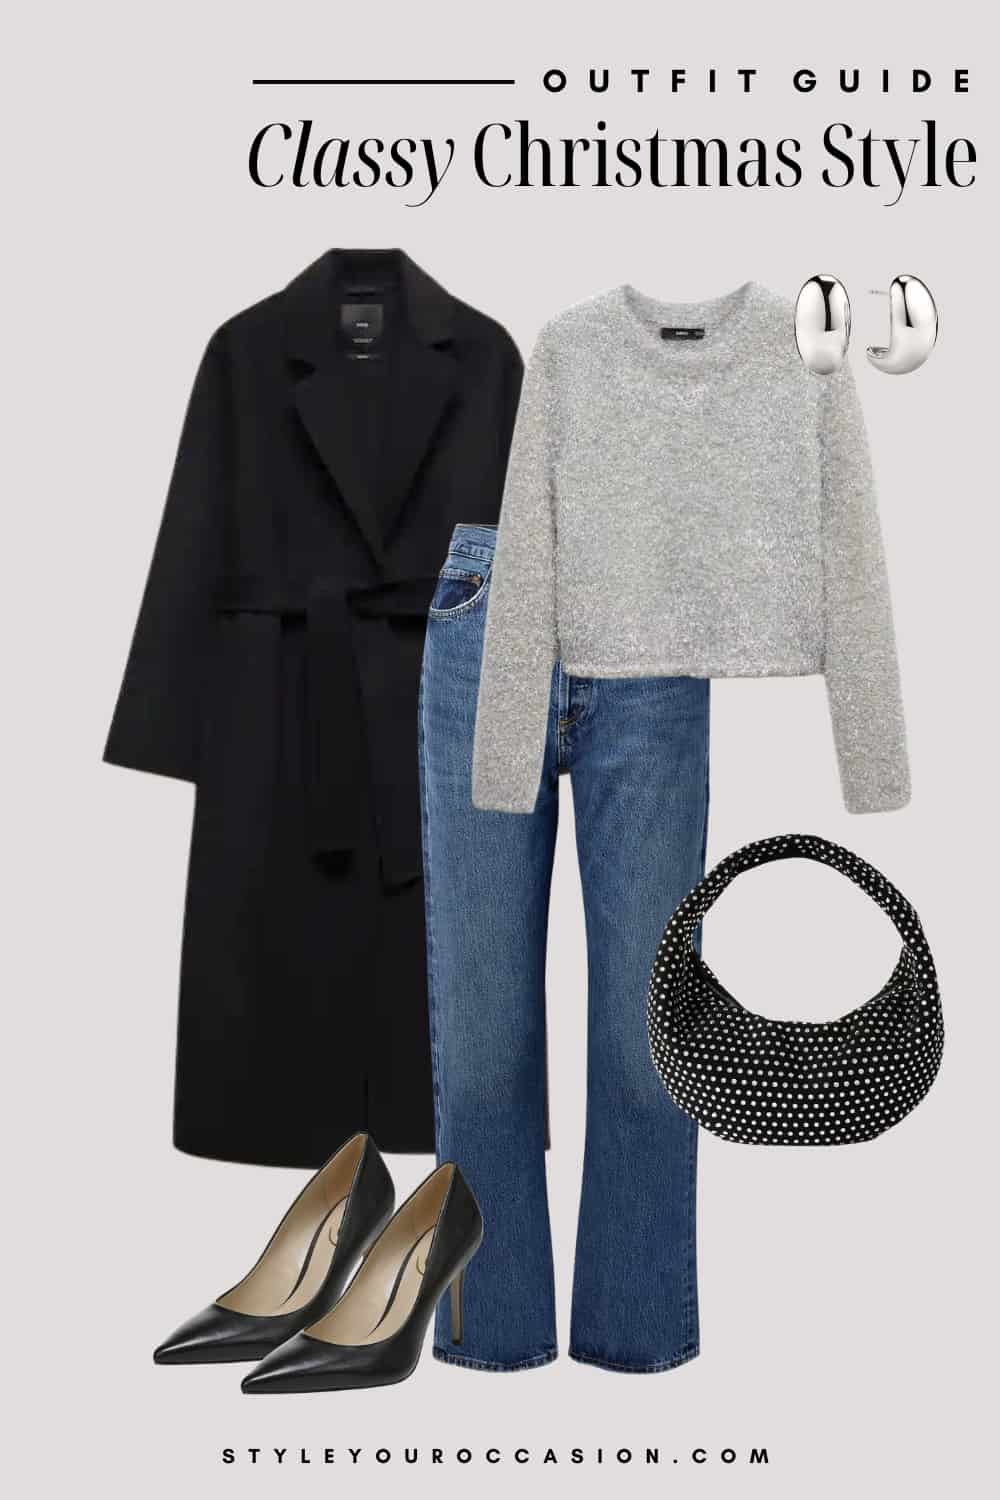 An image board of a Christmas outfit featuring wide-leg blue jeans, a fluffy grey crewneck sweater, a long black wool coat, black pumps, a black and silver handbag, and chunky silver hoop earrings